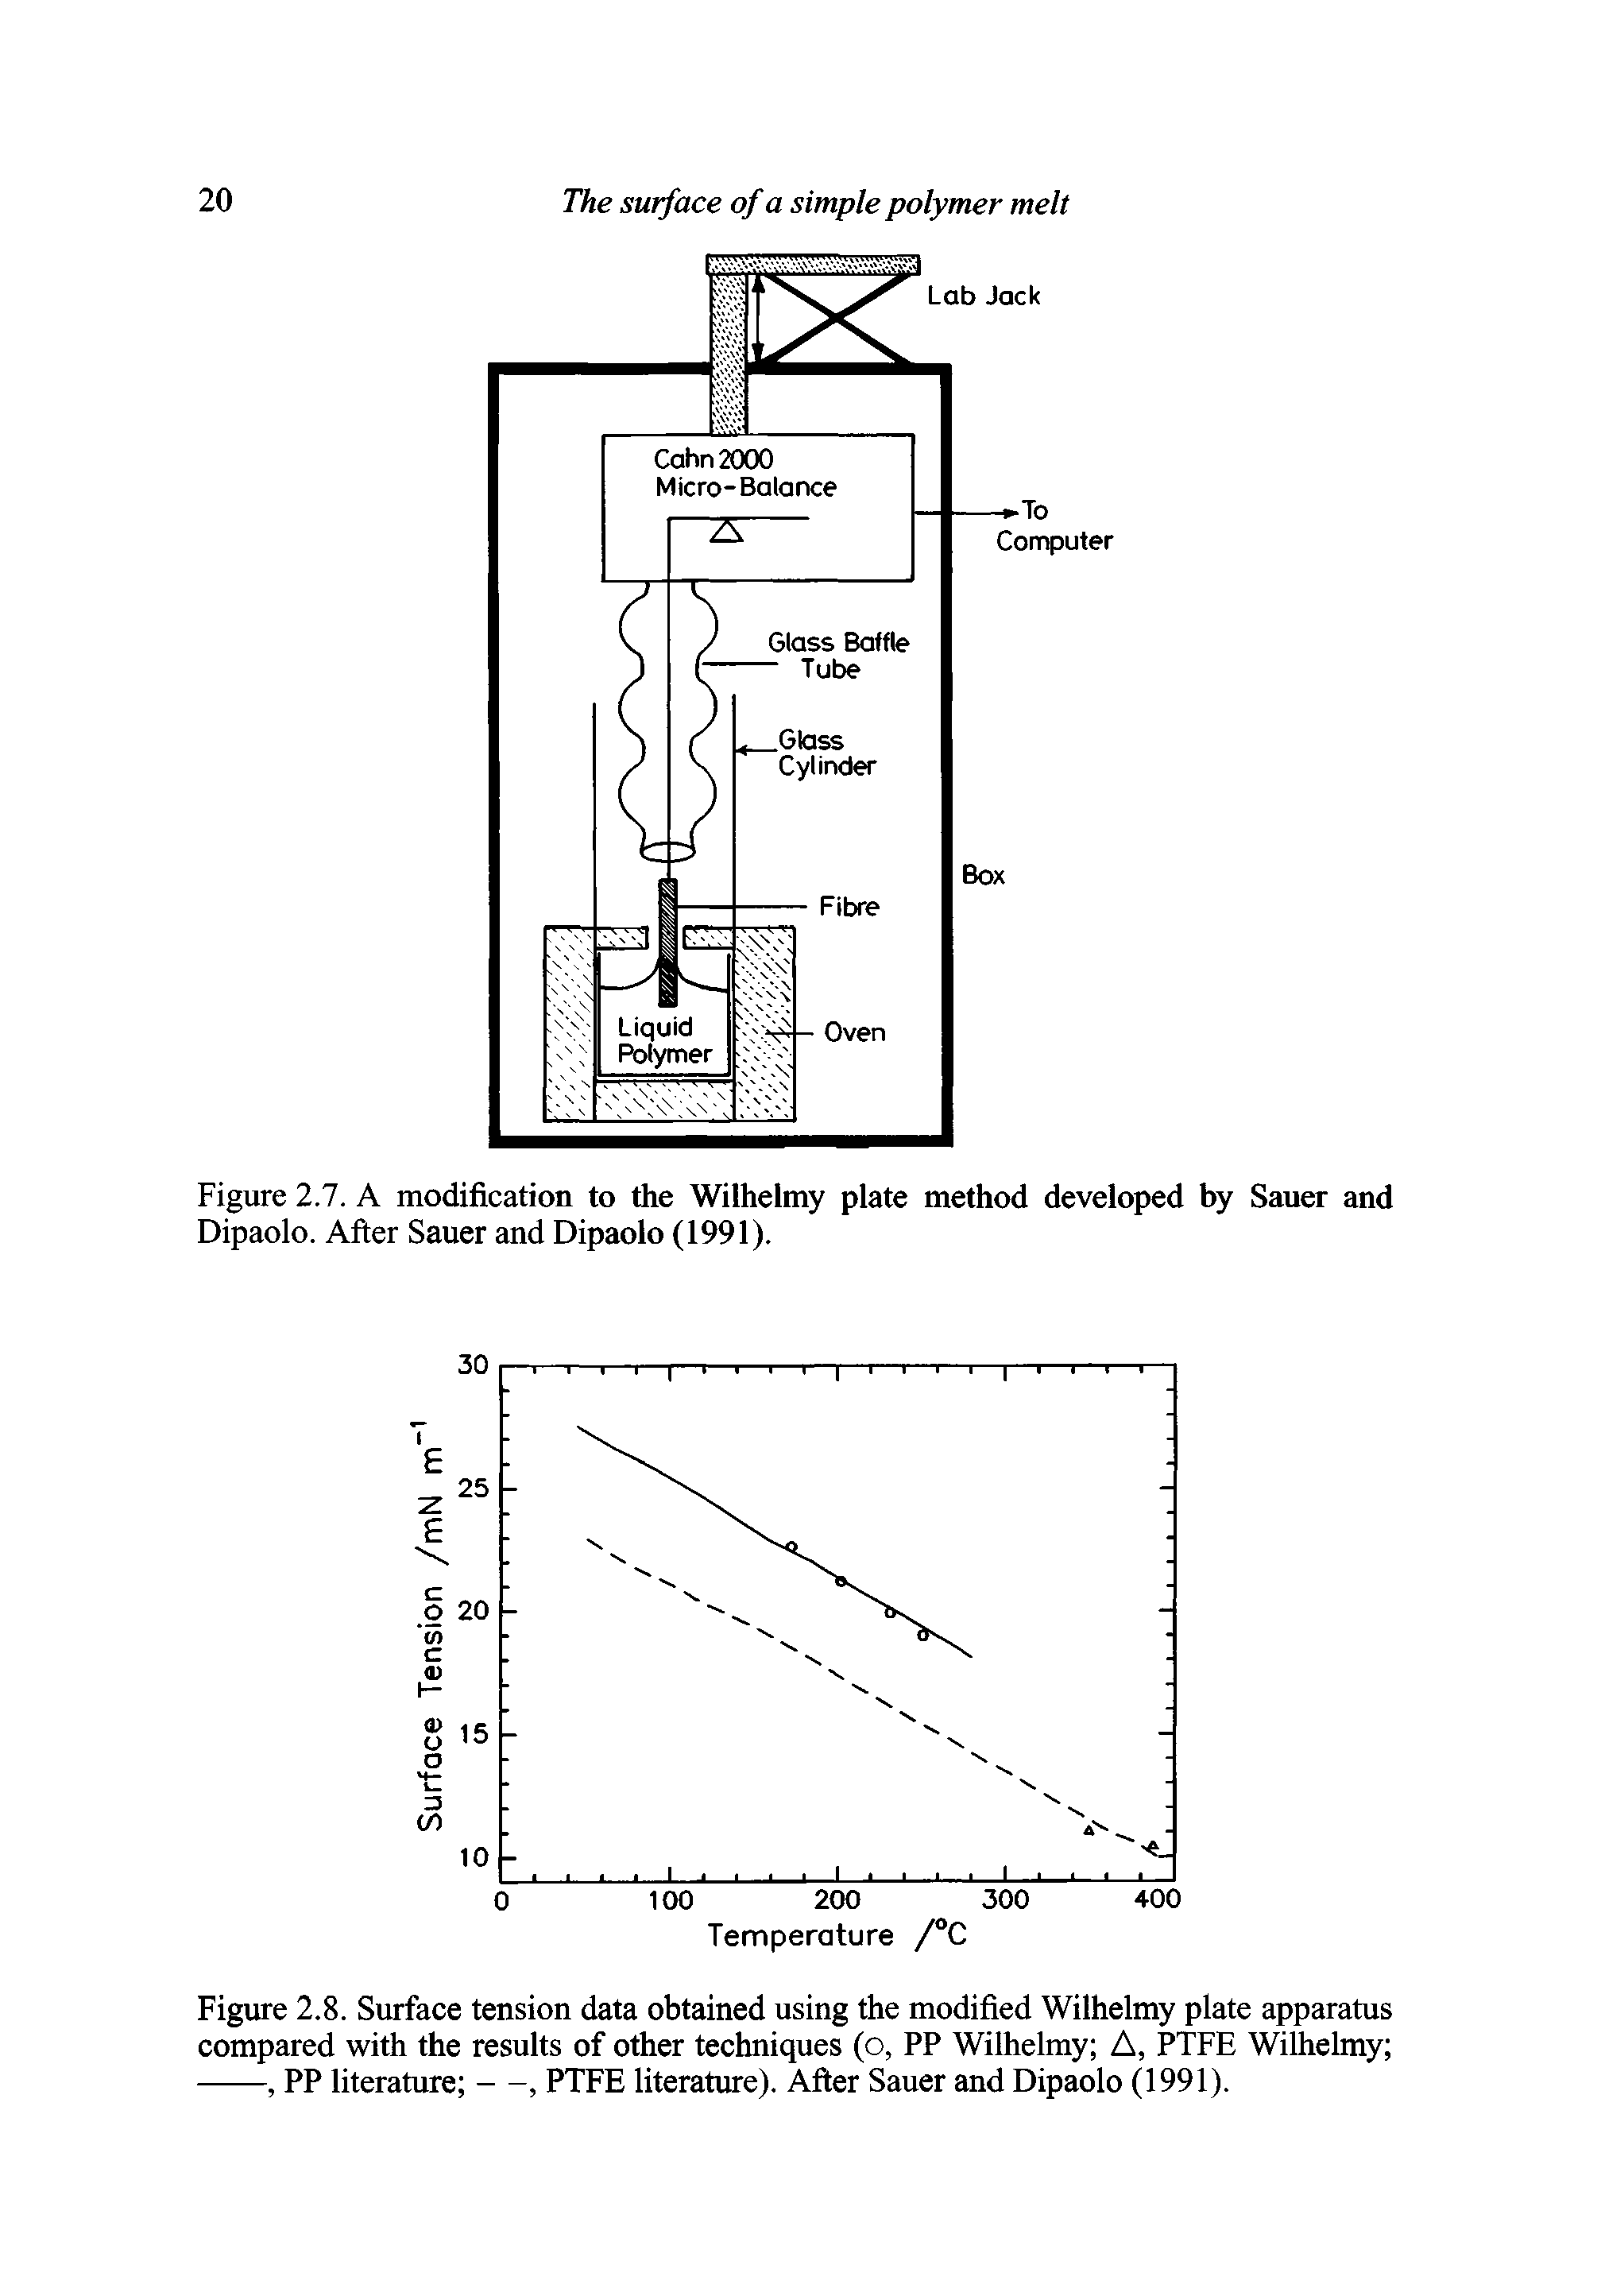 Figure 2.8. Surface tension data obtained using the modified Wilhelmy plate apparatus compared with the results of other techniques (o, PP Wilhelmy A, PTFE Wilhelmy -----, PP literature —, PTFE literature). After Sauer and Dipaolo (1991).